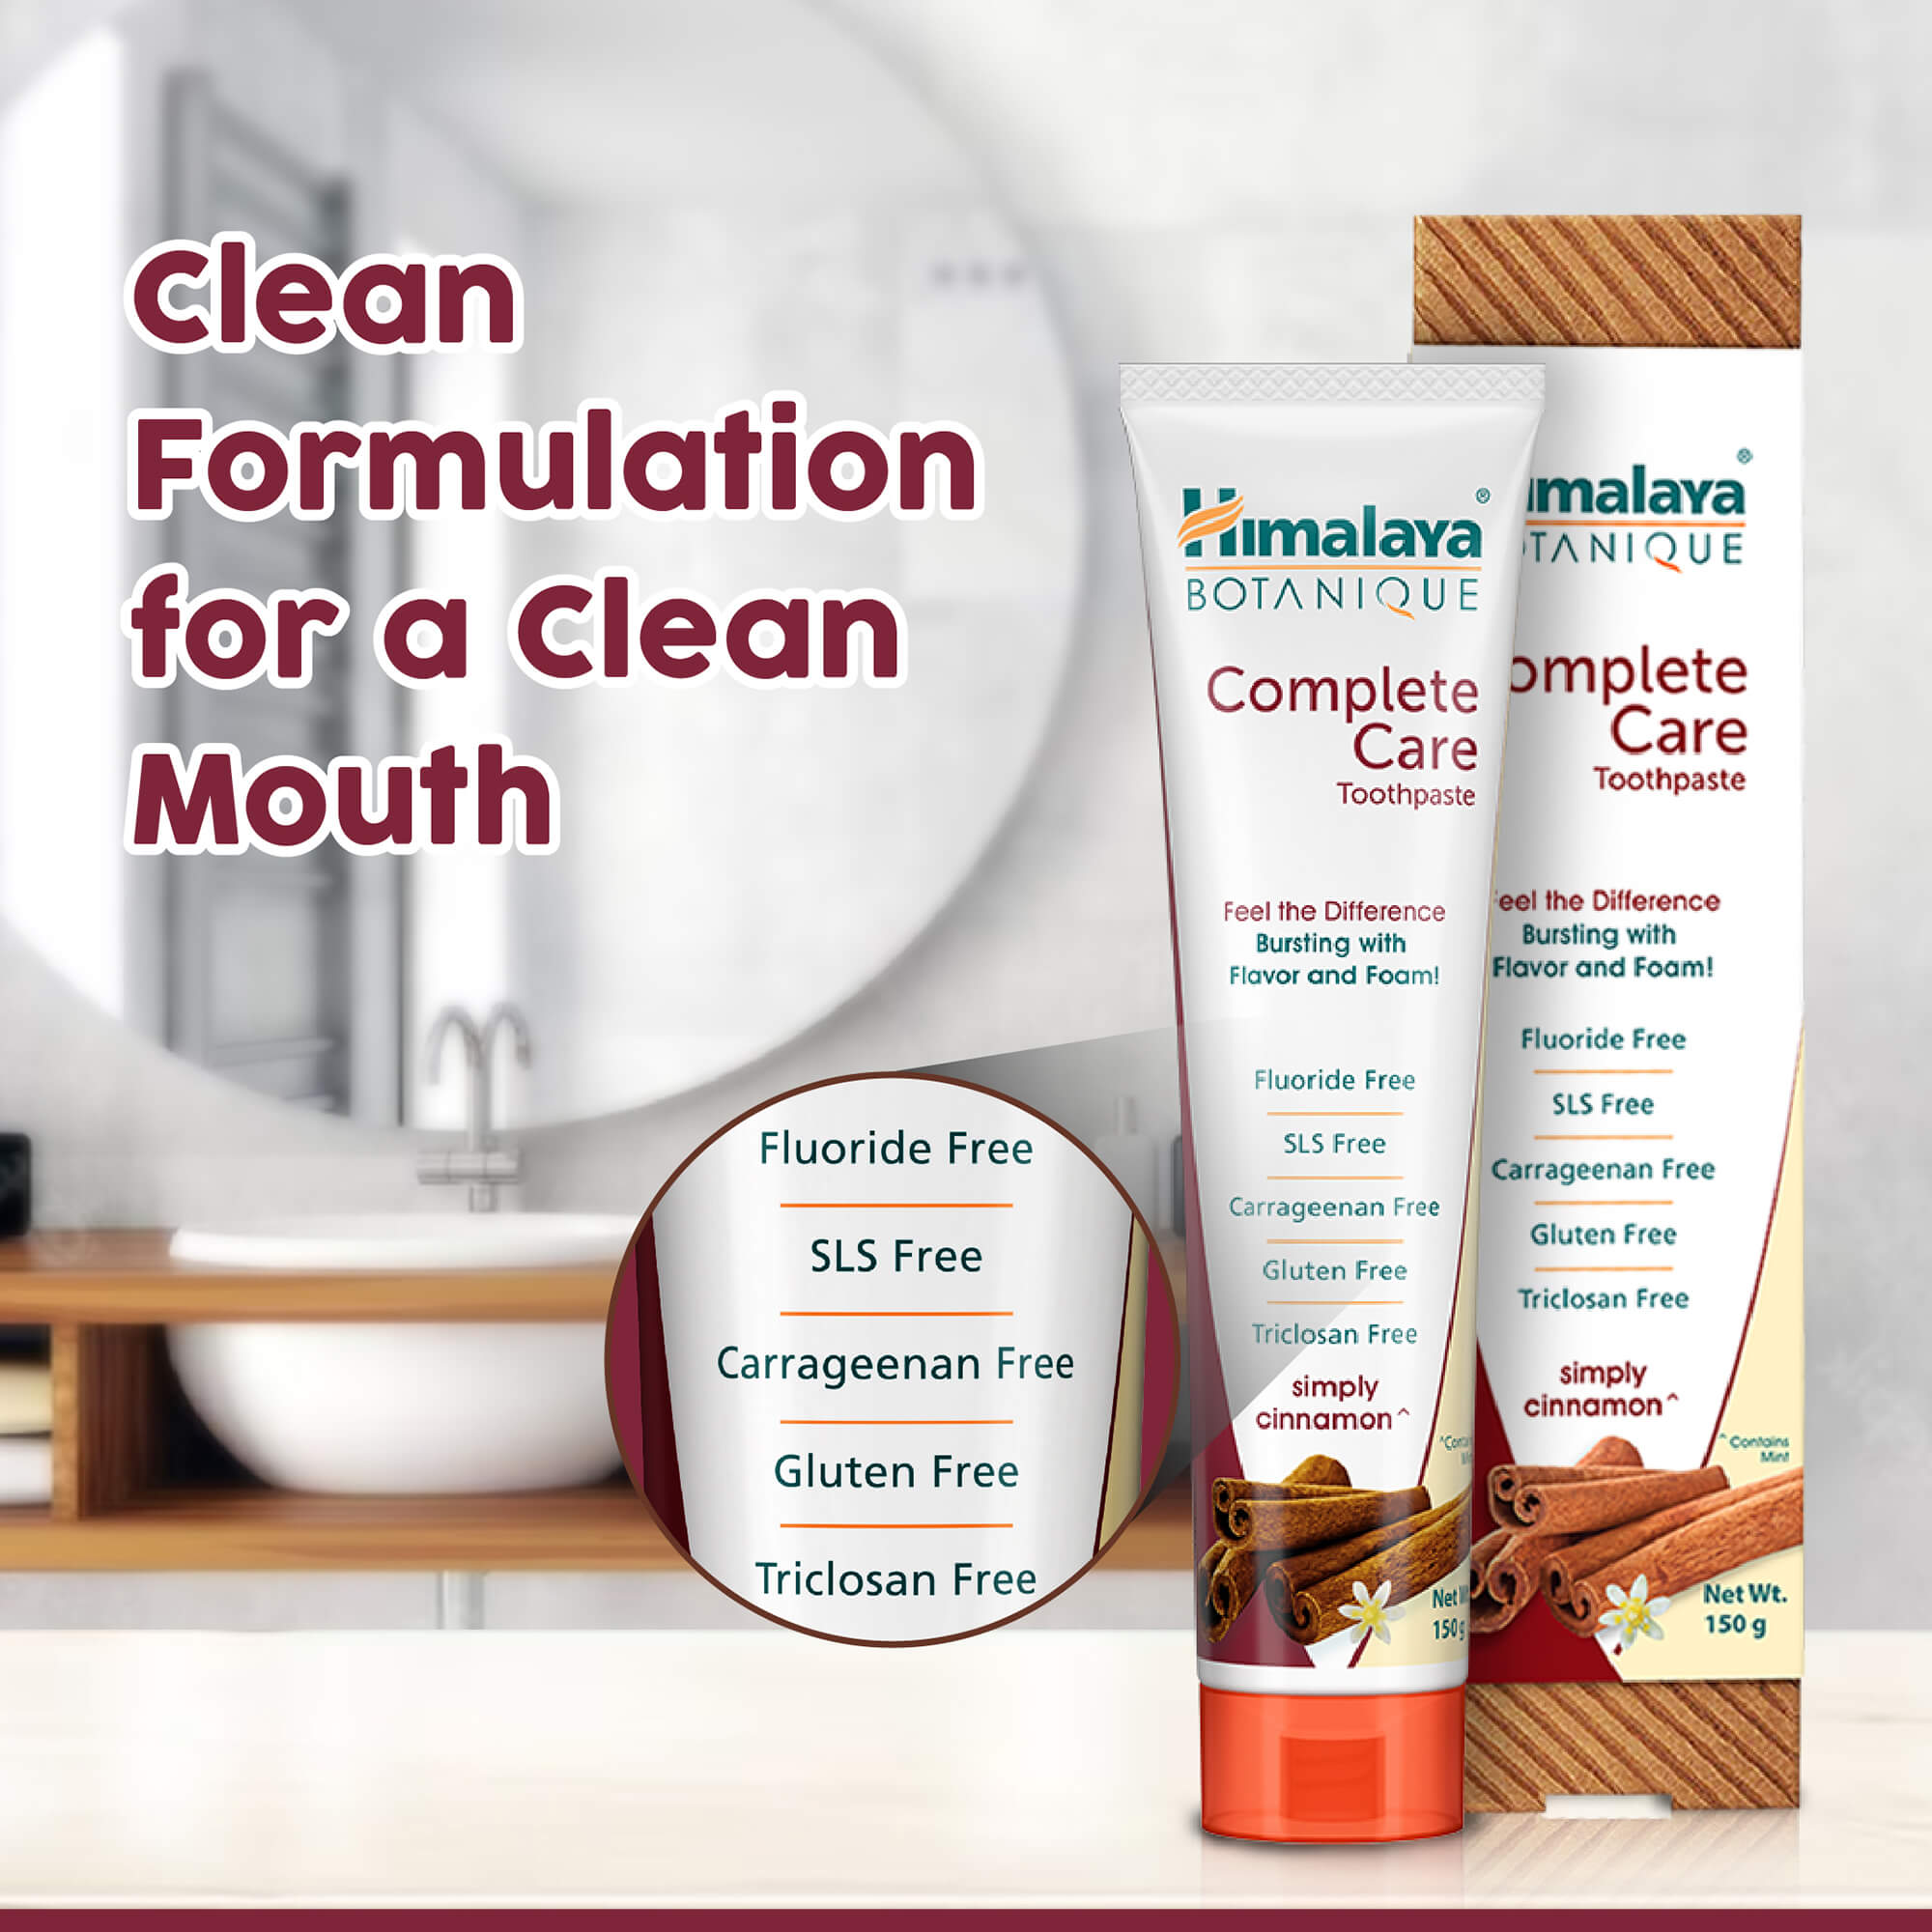  Himalaya BOTANIQUE Complete Care Toothpaste (Simply Cinnamon) - Clean Formulation